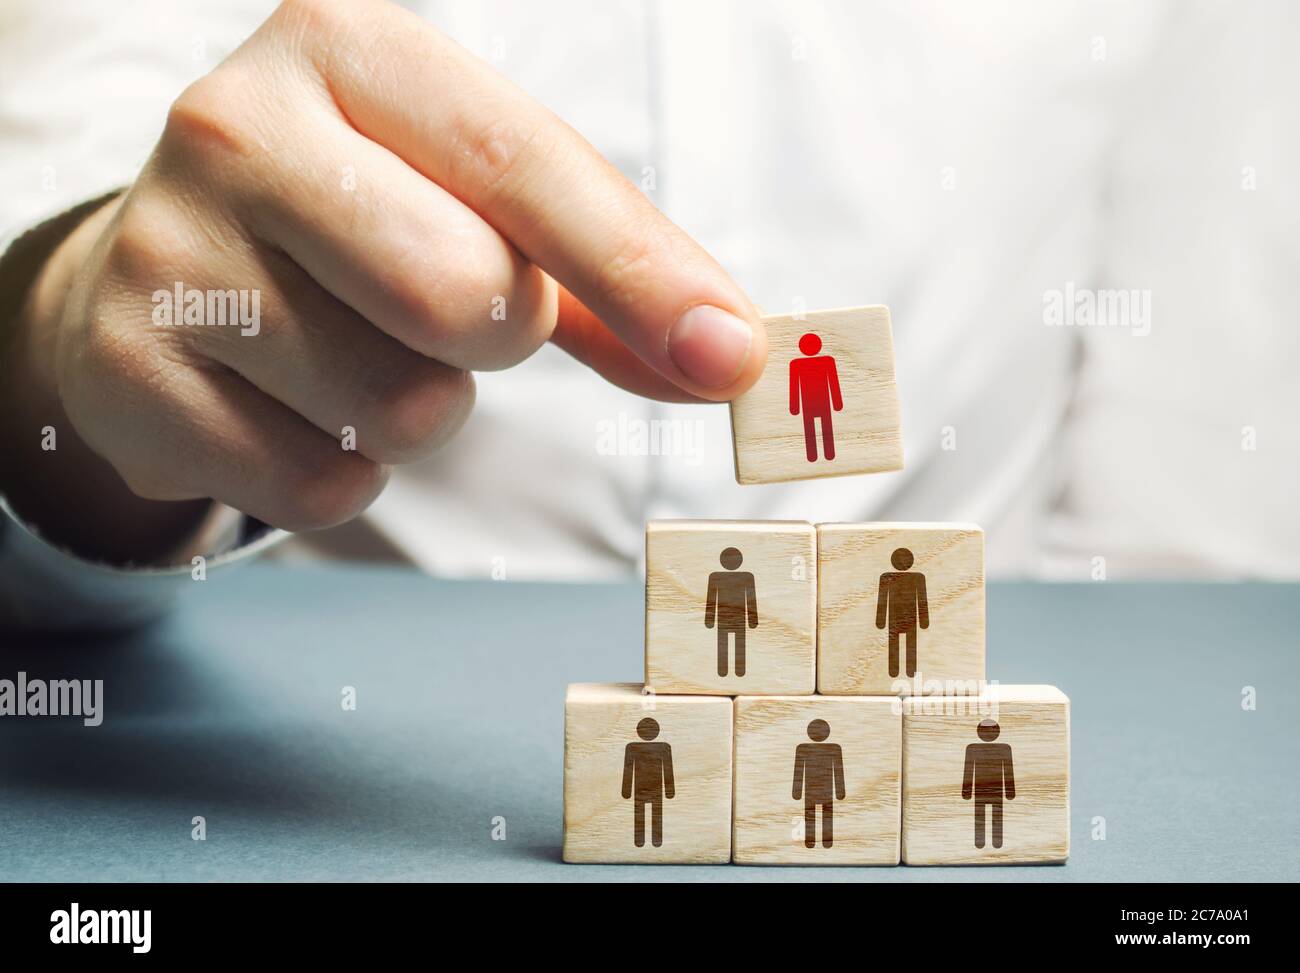 A hand places a mentor leader at the head of a group of people. Team building, hierarchical power vertical. Leadership skills. Teamwork, cooperation a Stock Photo